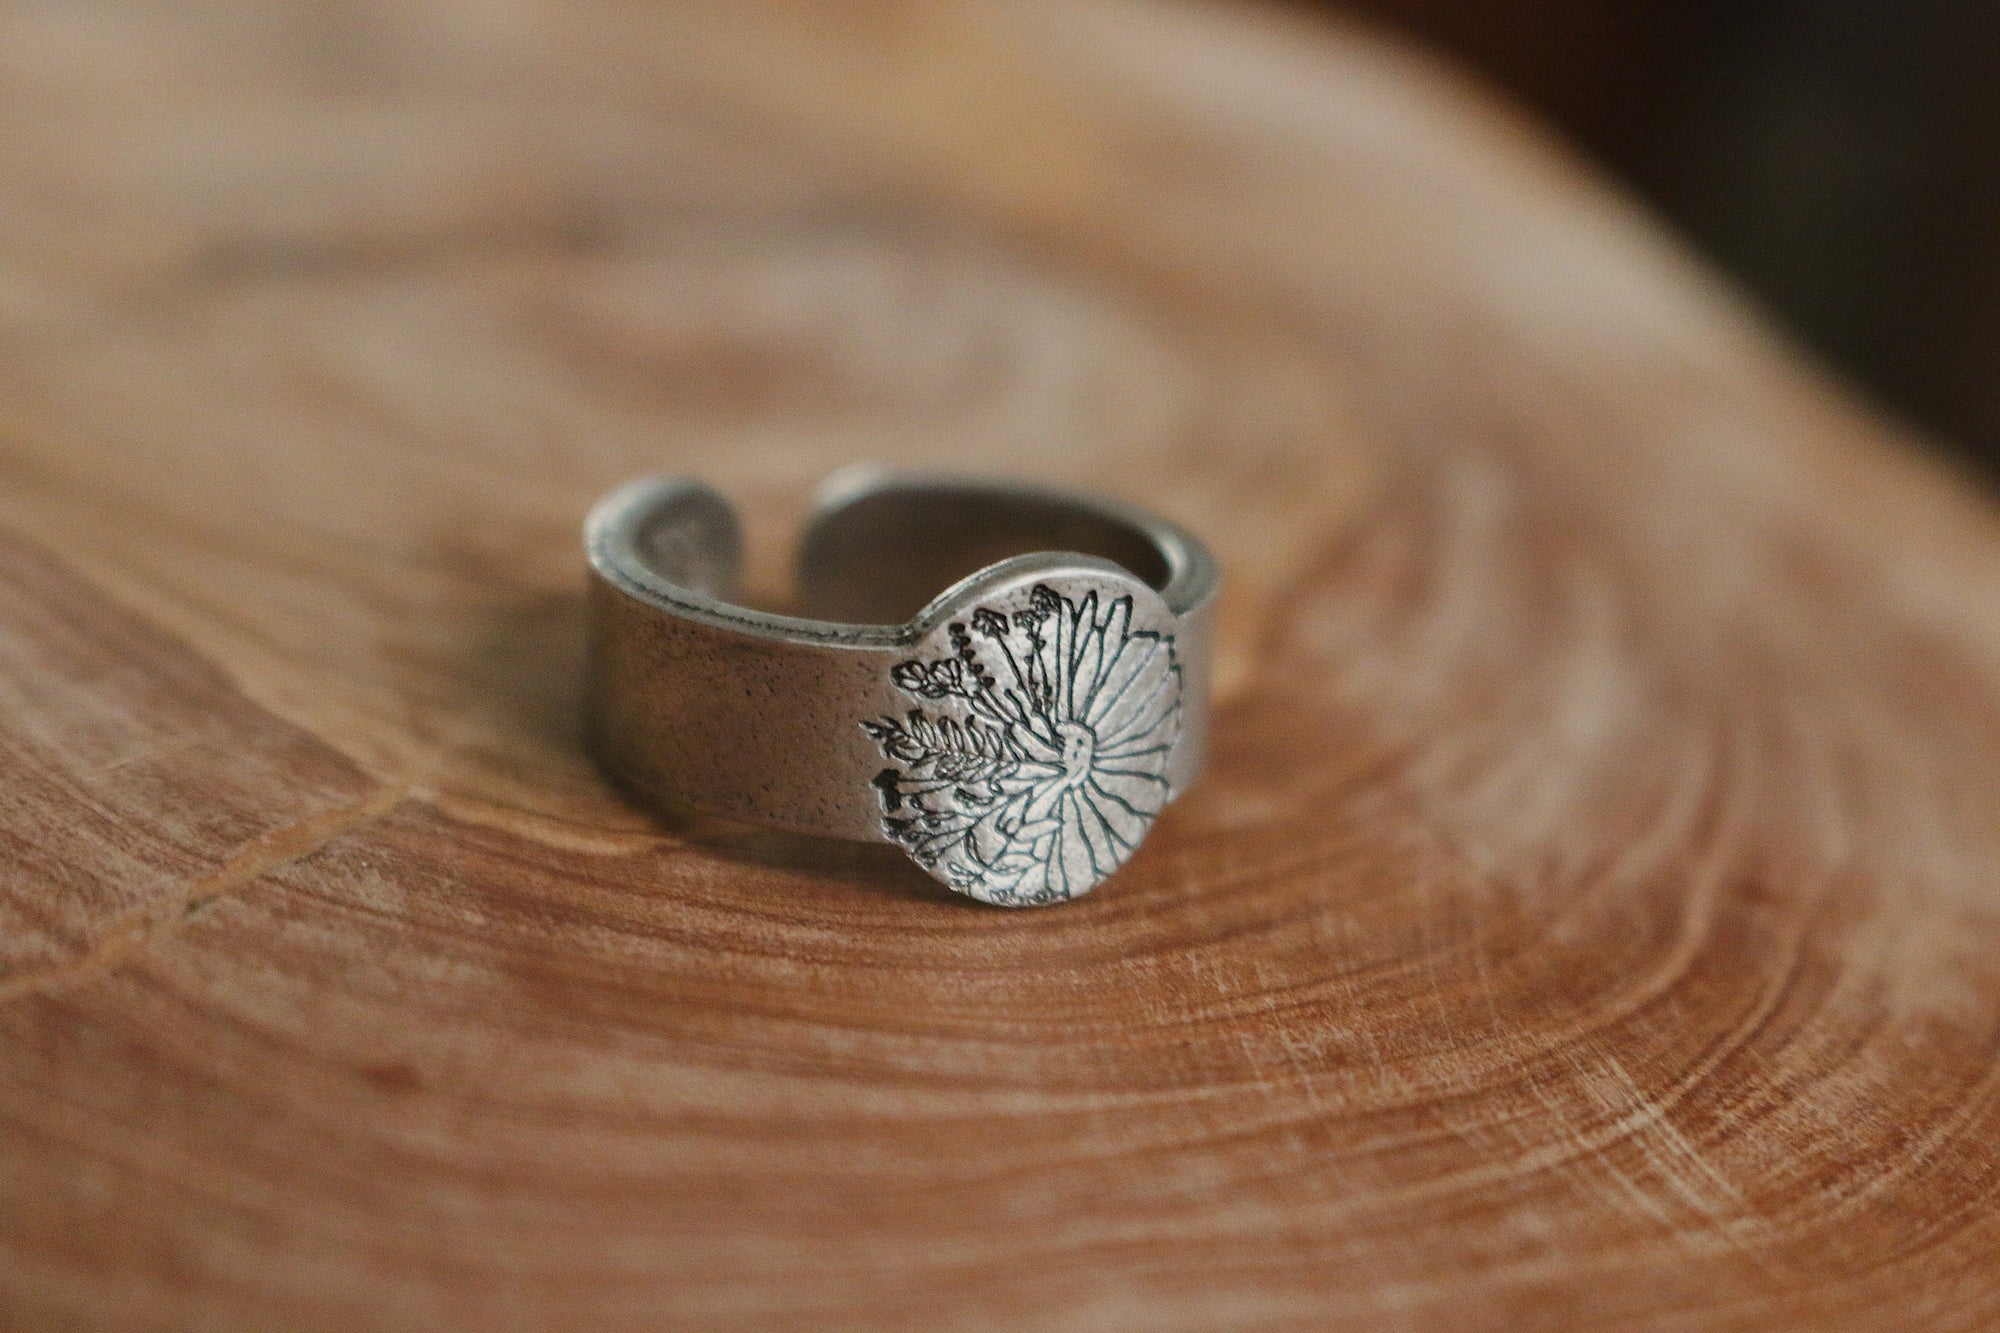 Wildflower Daisy Ring | Rustic Floral Signet Ring | Best Friend Birthday Gift | Mother's Day Gift | Wild Flower Jewelry | Floral Jewelry